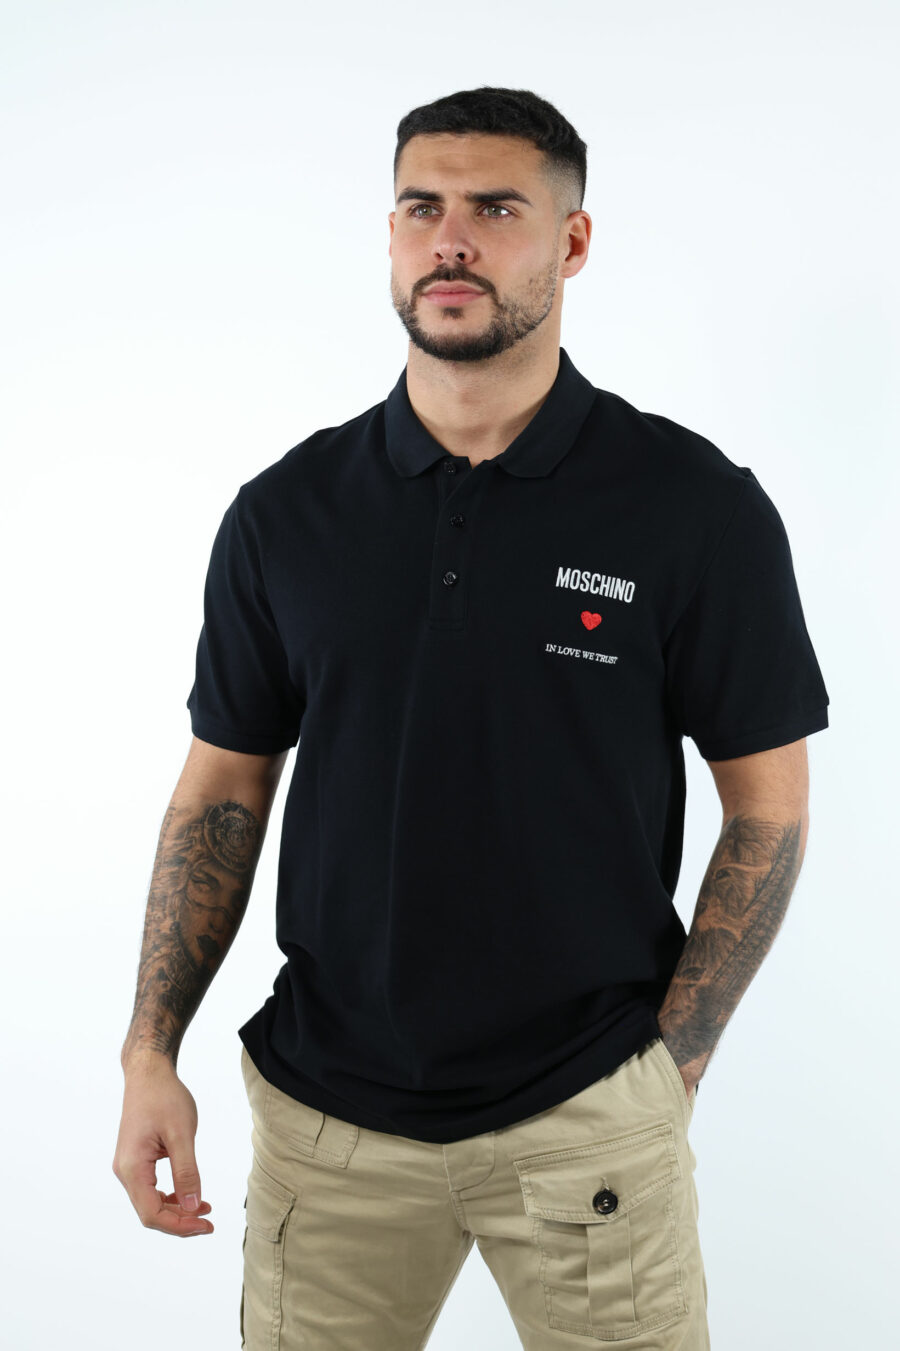 Black polo shirt with logo "in love we trust" - 106970